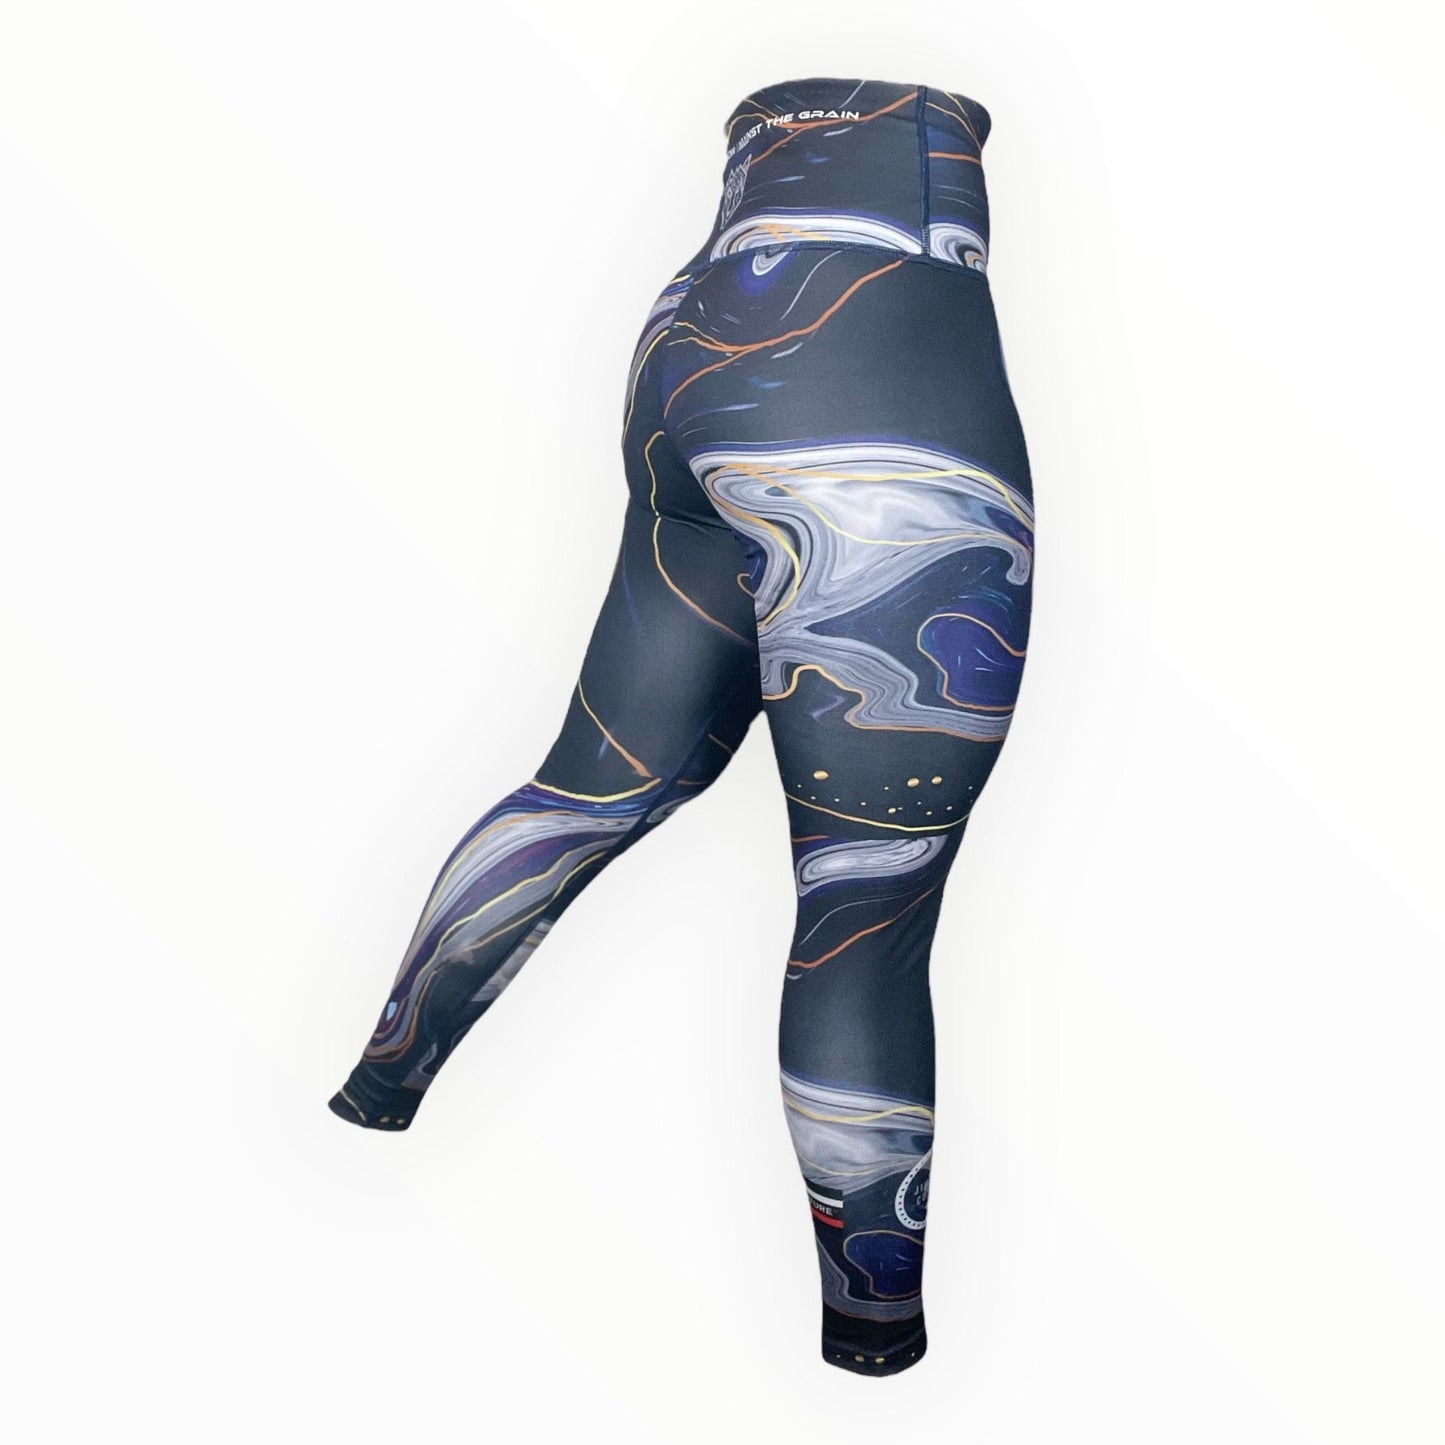 BJJ Couture Women's Compression Grappling Spats - Dark Blue and Purple Marble Indigo Inkscape with Gold Veining